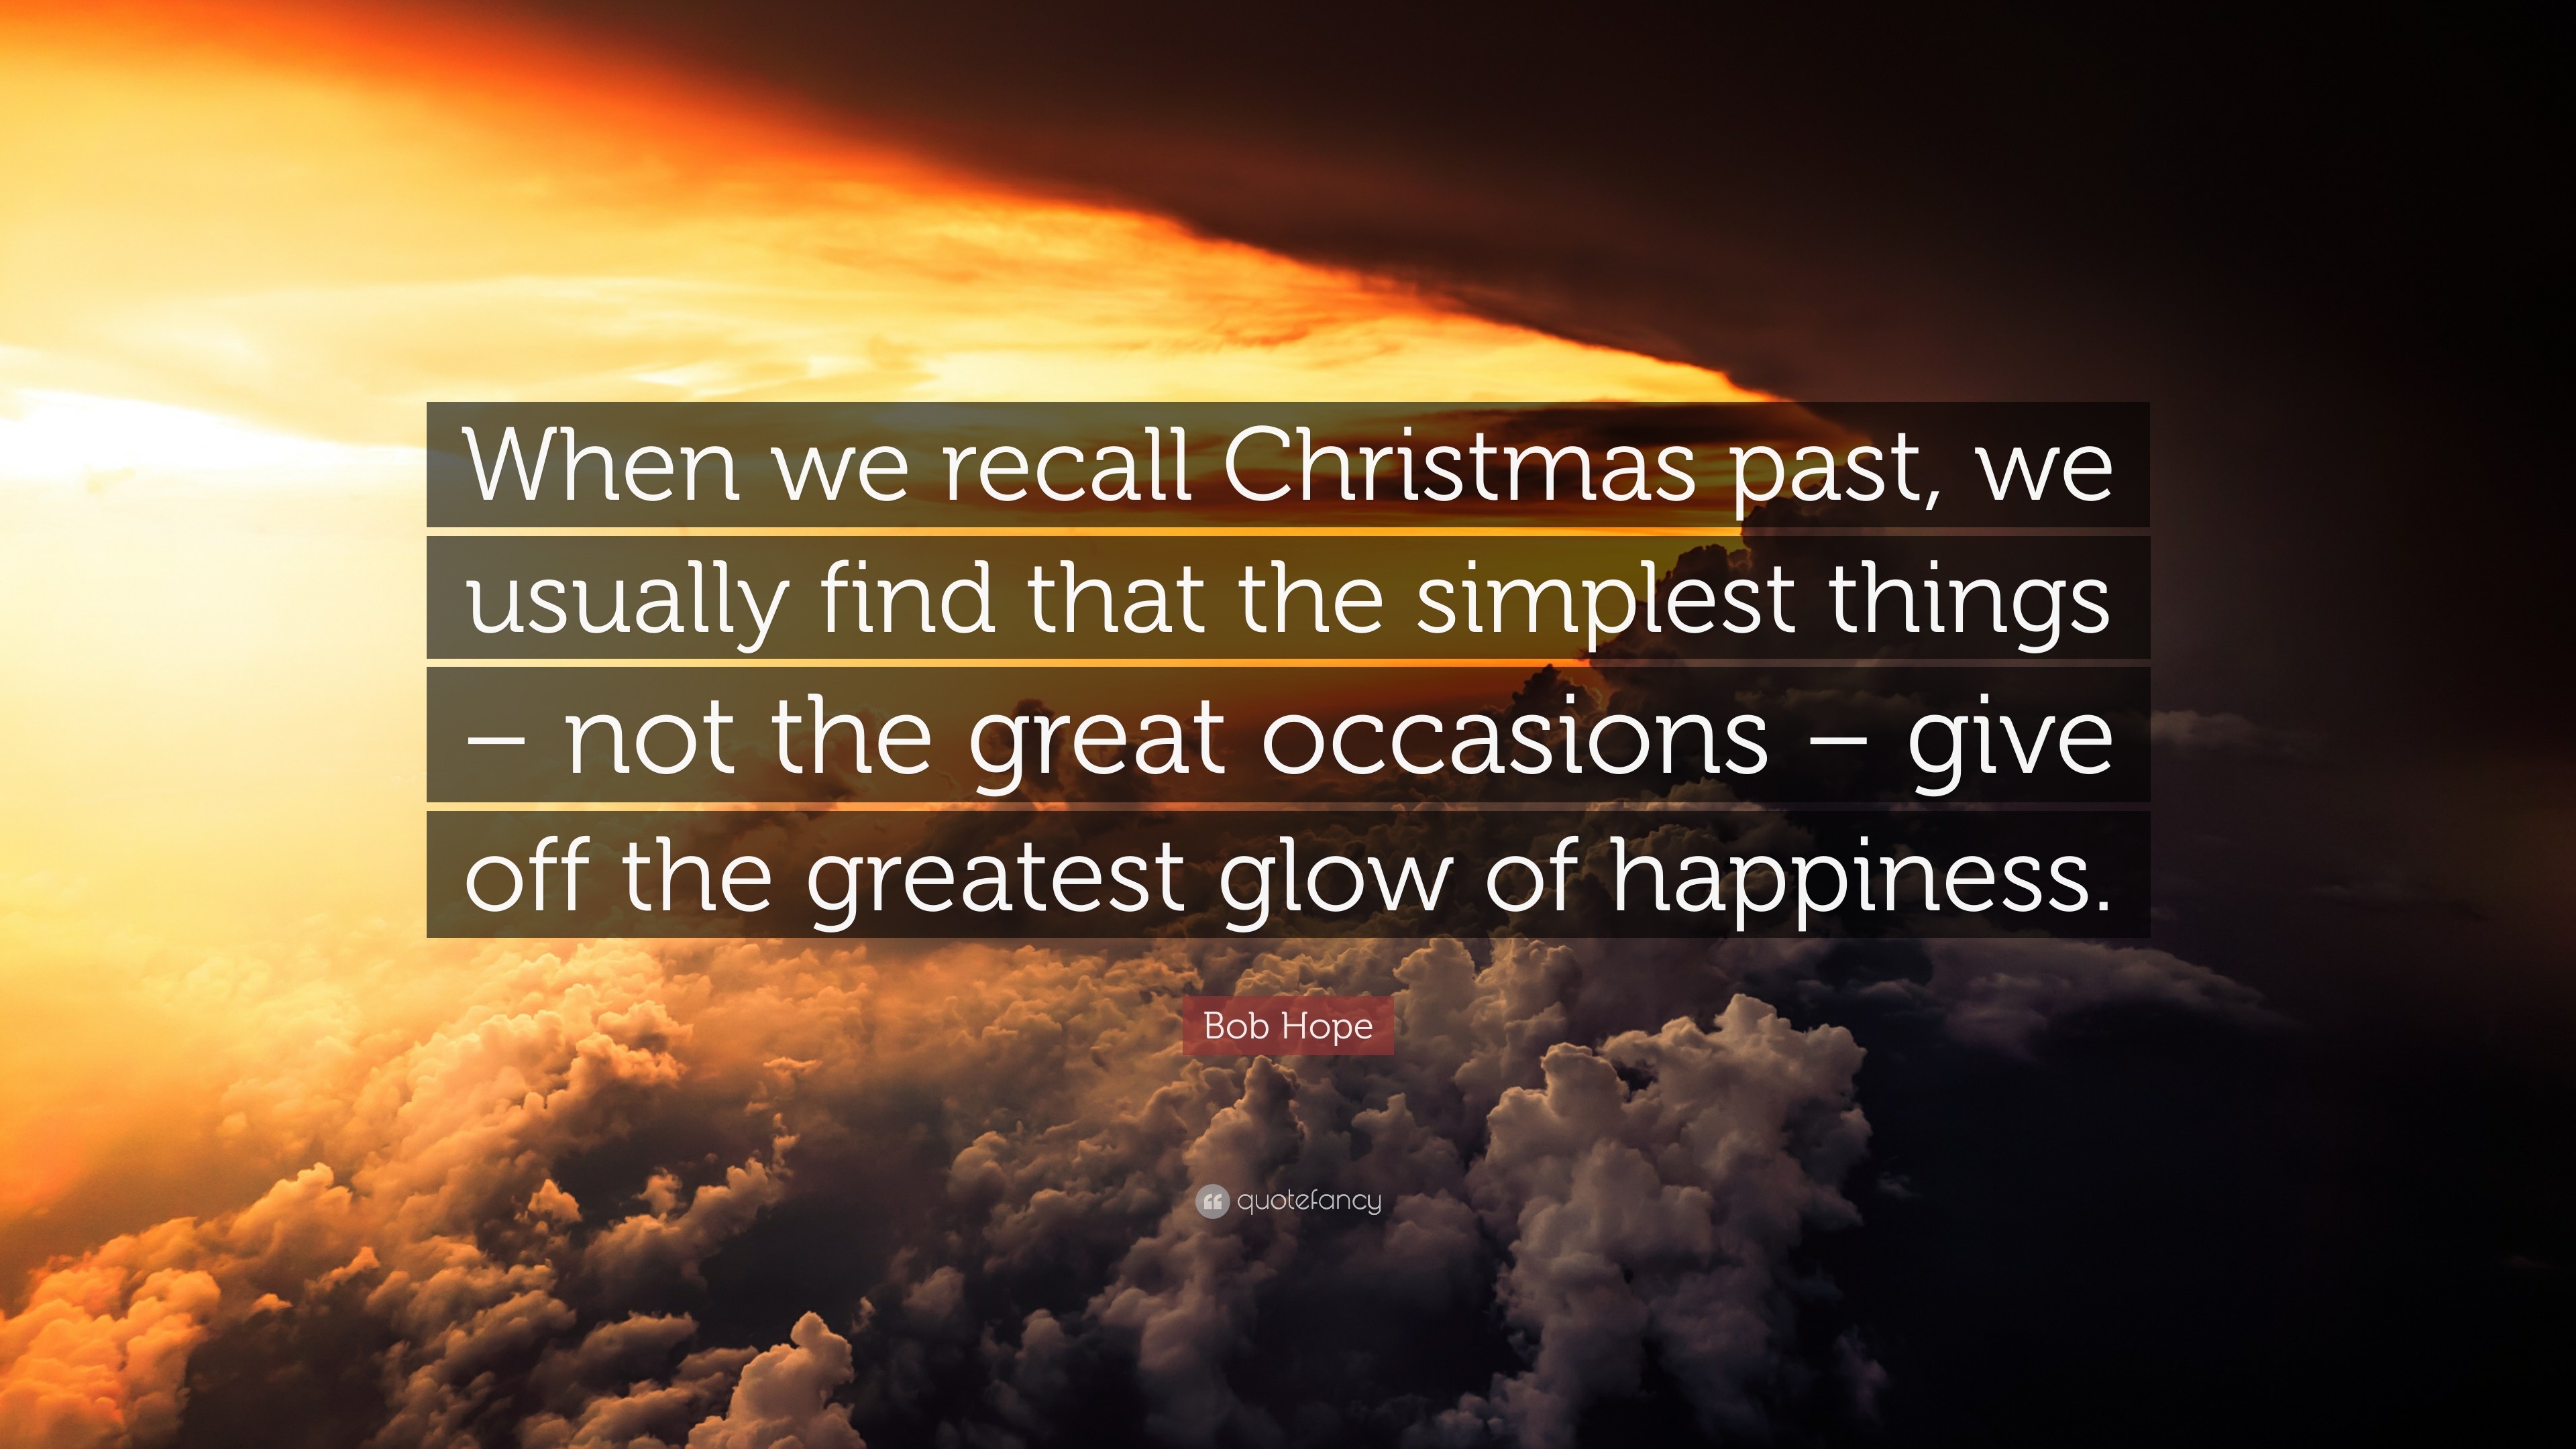 Bob Hope Quote: “When we recall Christmas past, we usually find that ...